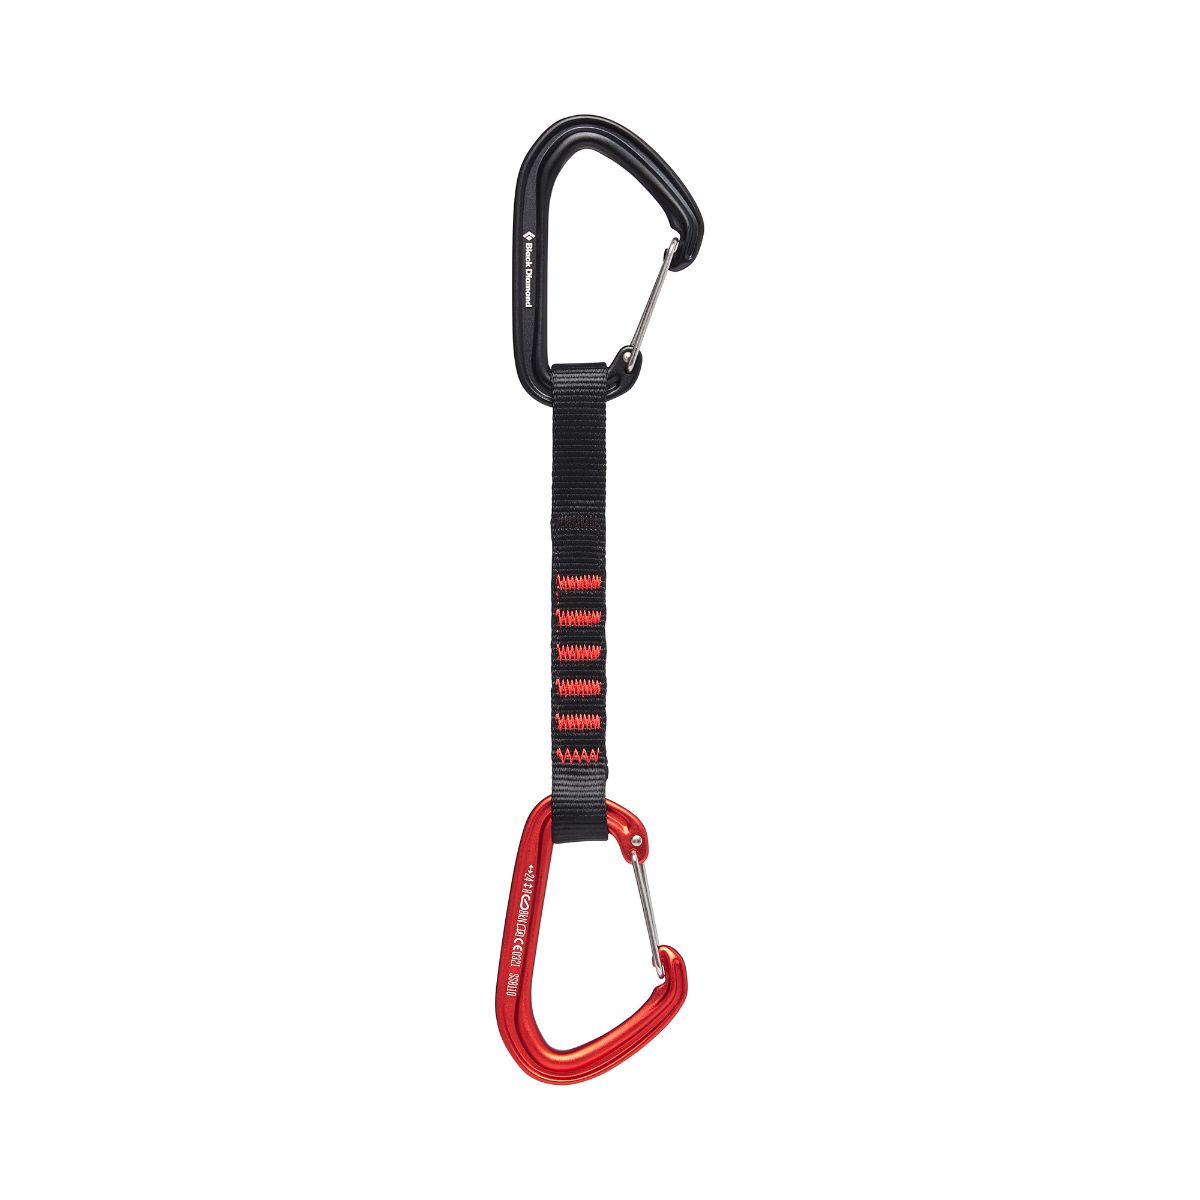 Black Diamond's lightweight and highly adaptable quickdraw features the updated HotWire wiregate carabiners.